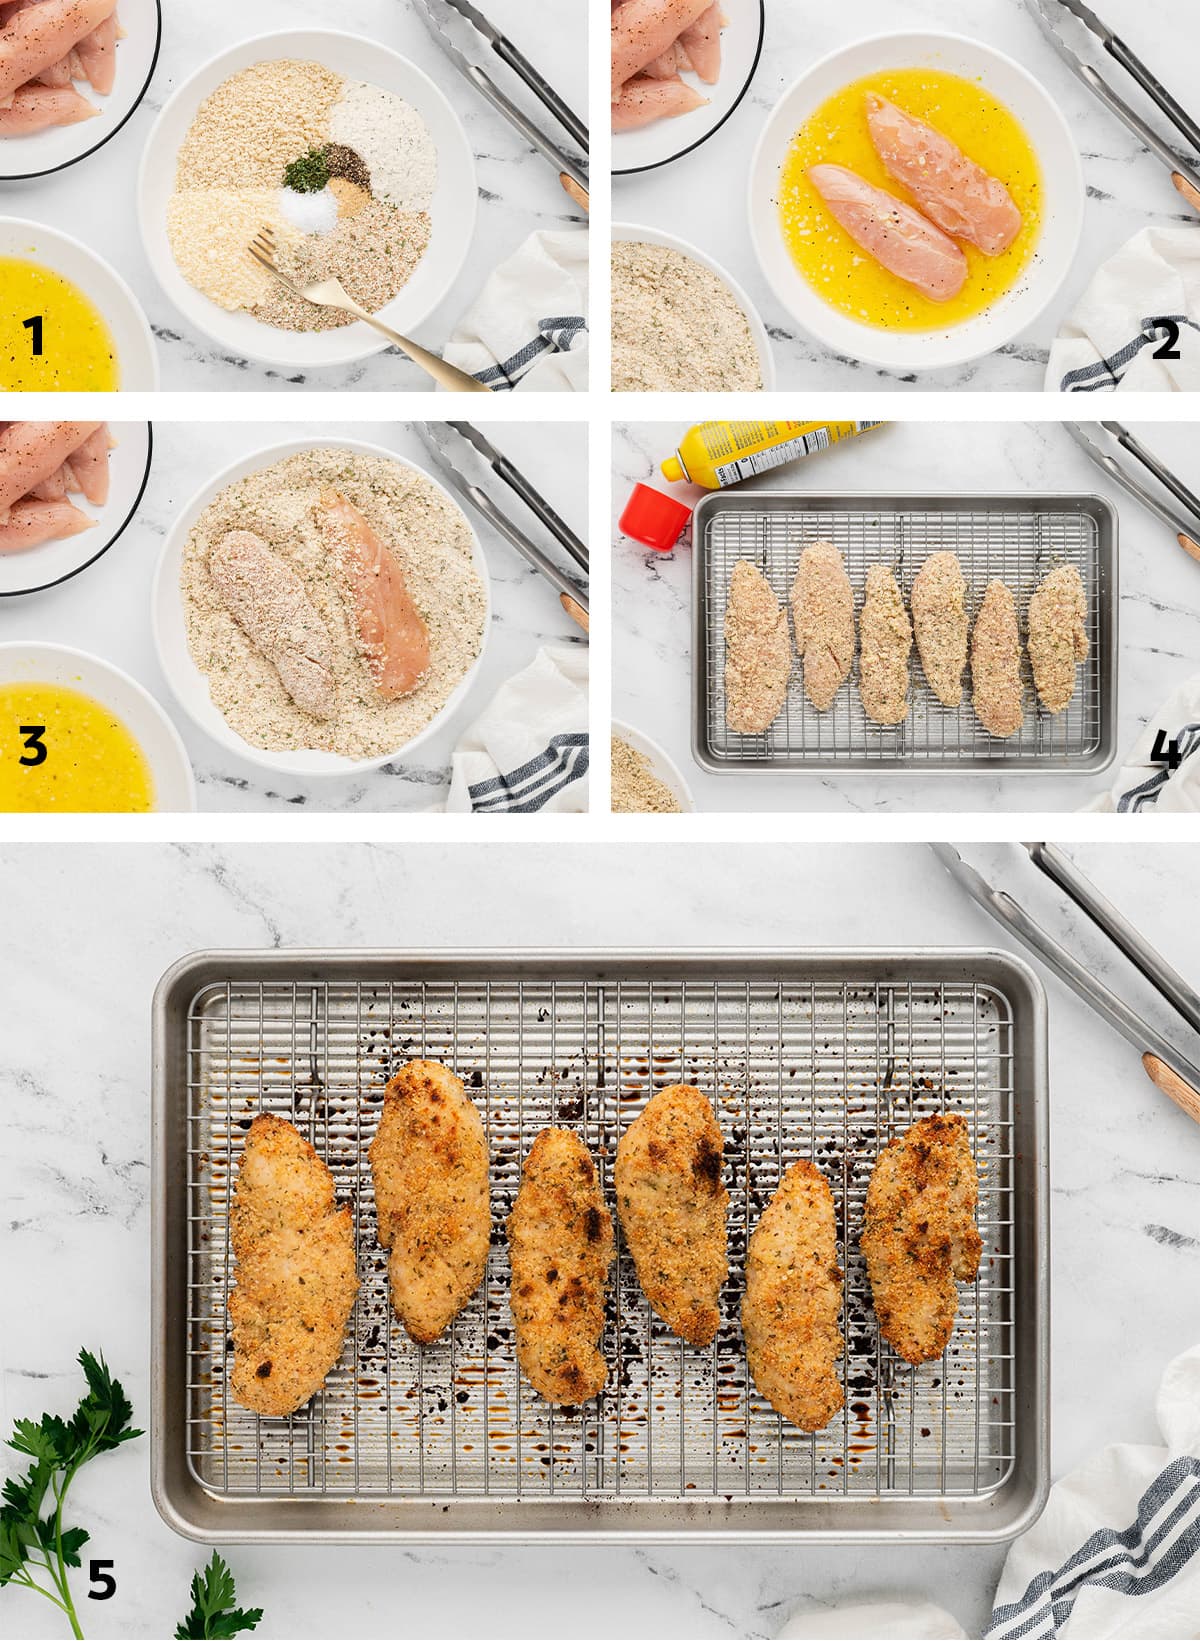 A collage of 5 images showing the steps for making baked chicken tenders